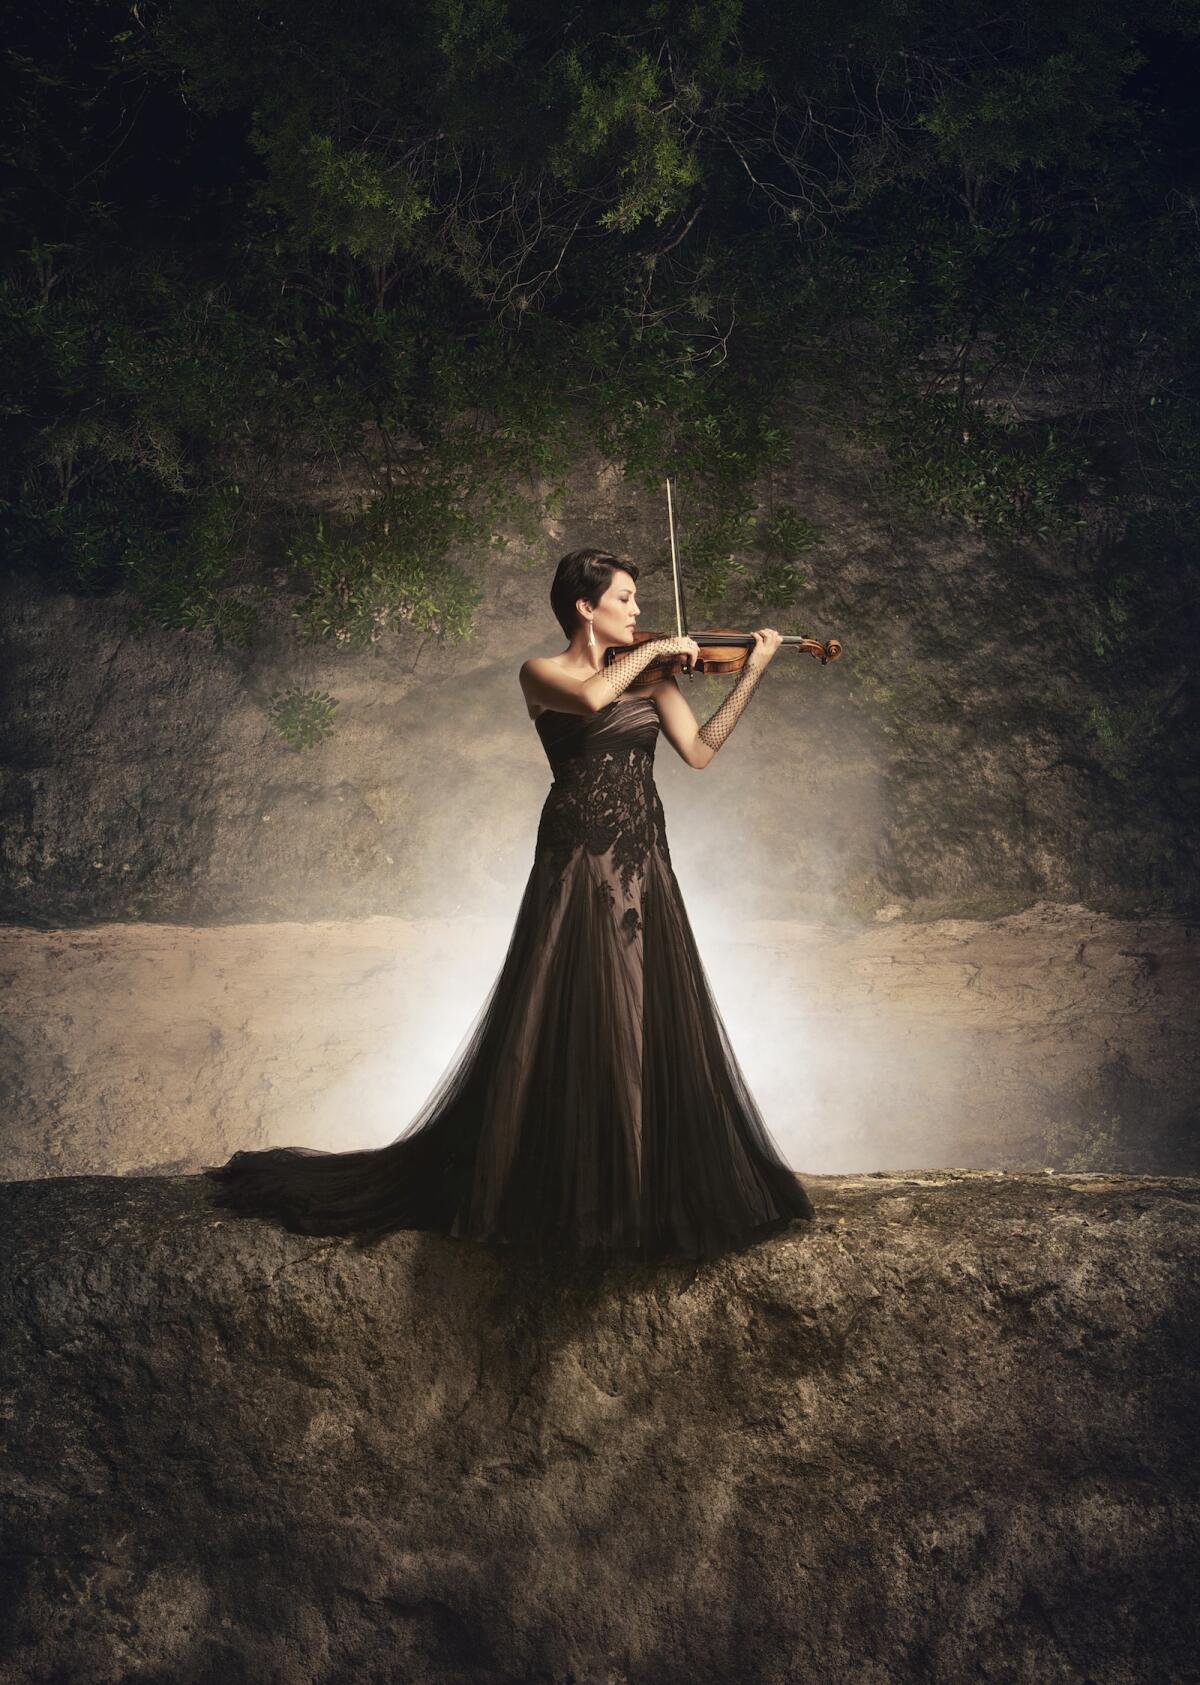 Anne Akiko Meyers will perform with the Royal Philharmonic Orchestra Jan. 18 at the Renée and Henry Segerstrom Concert Hall.